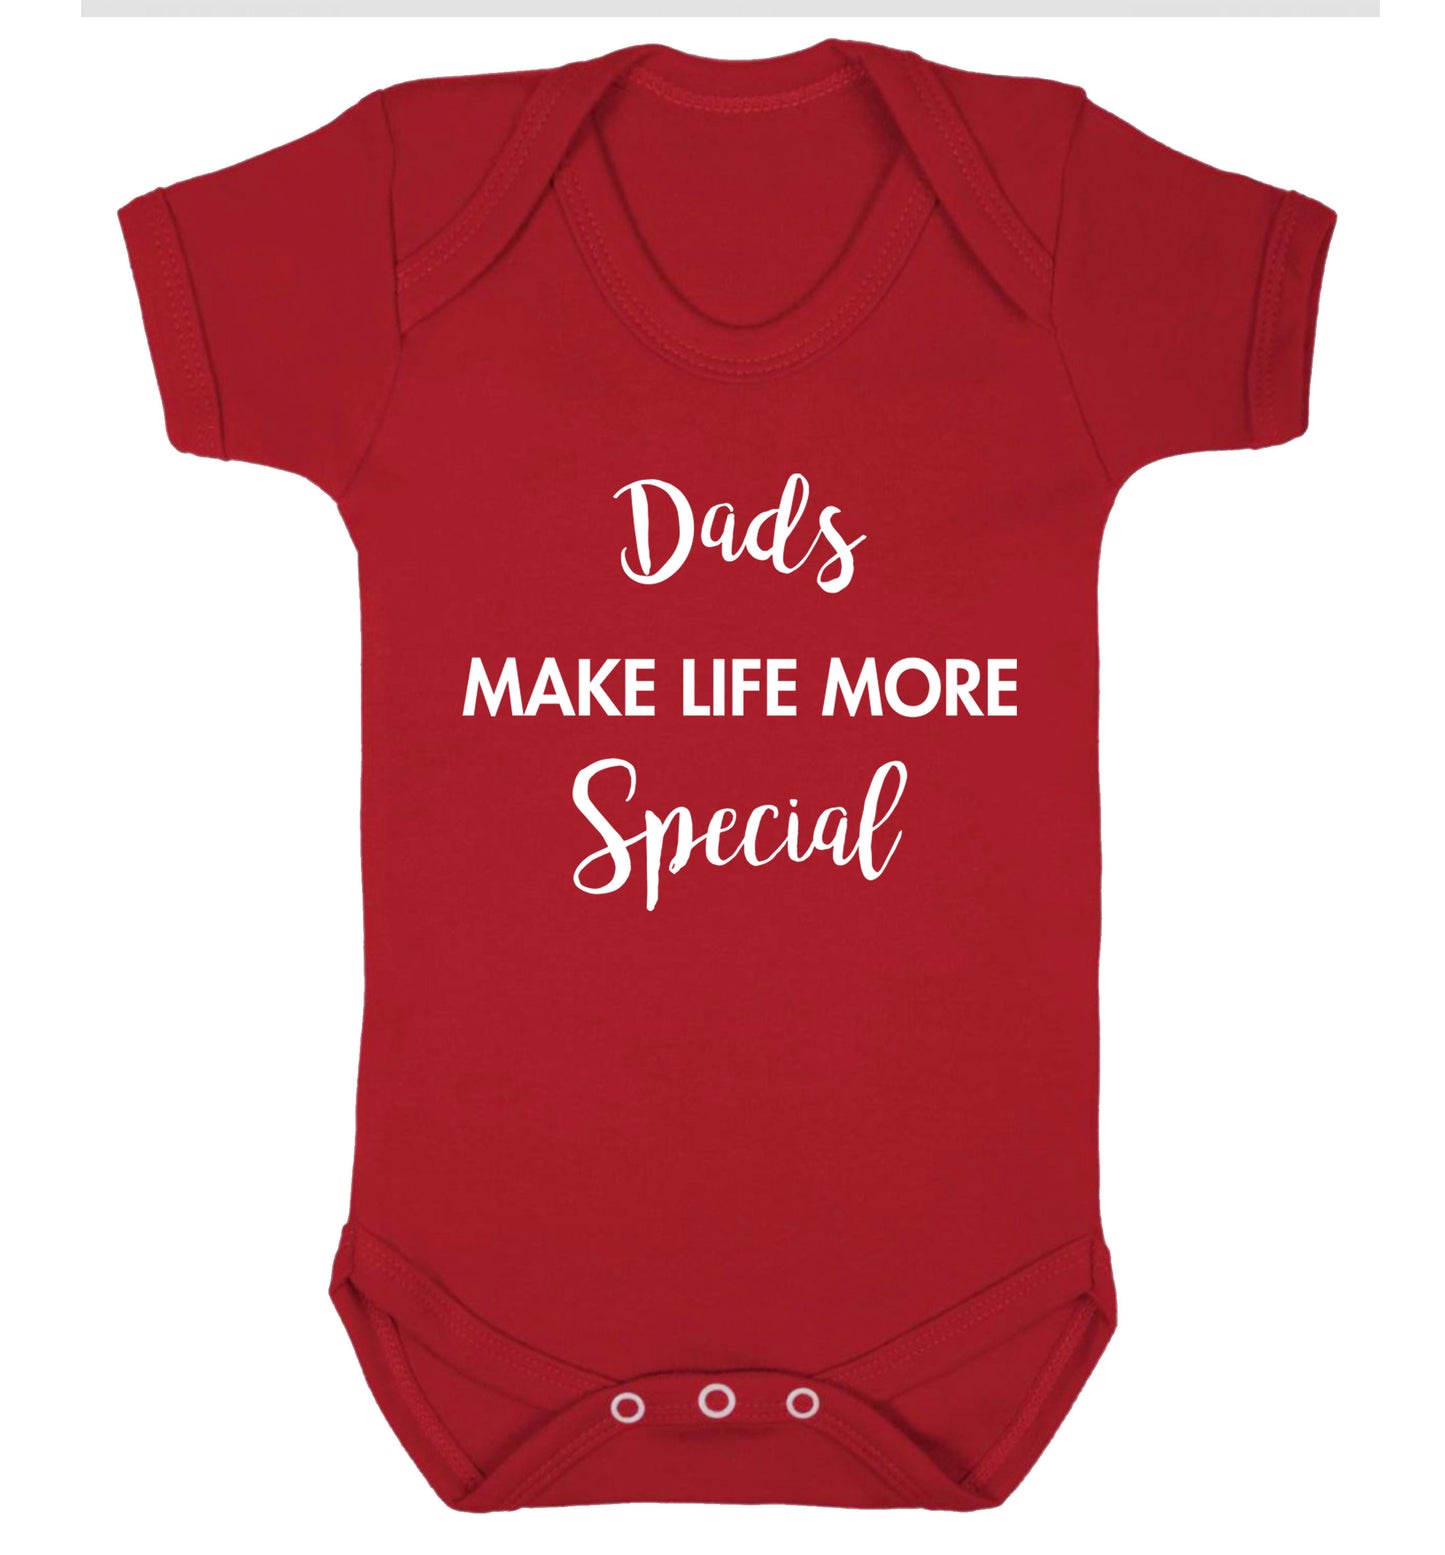 Dads make life more special Baby Vest red 18-24 months